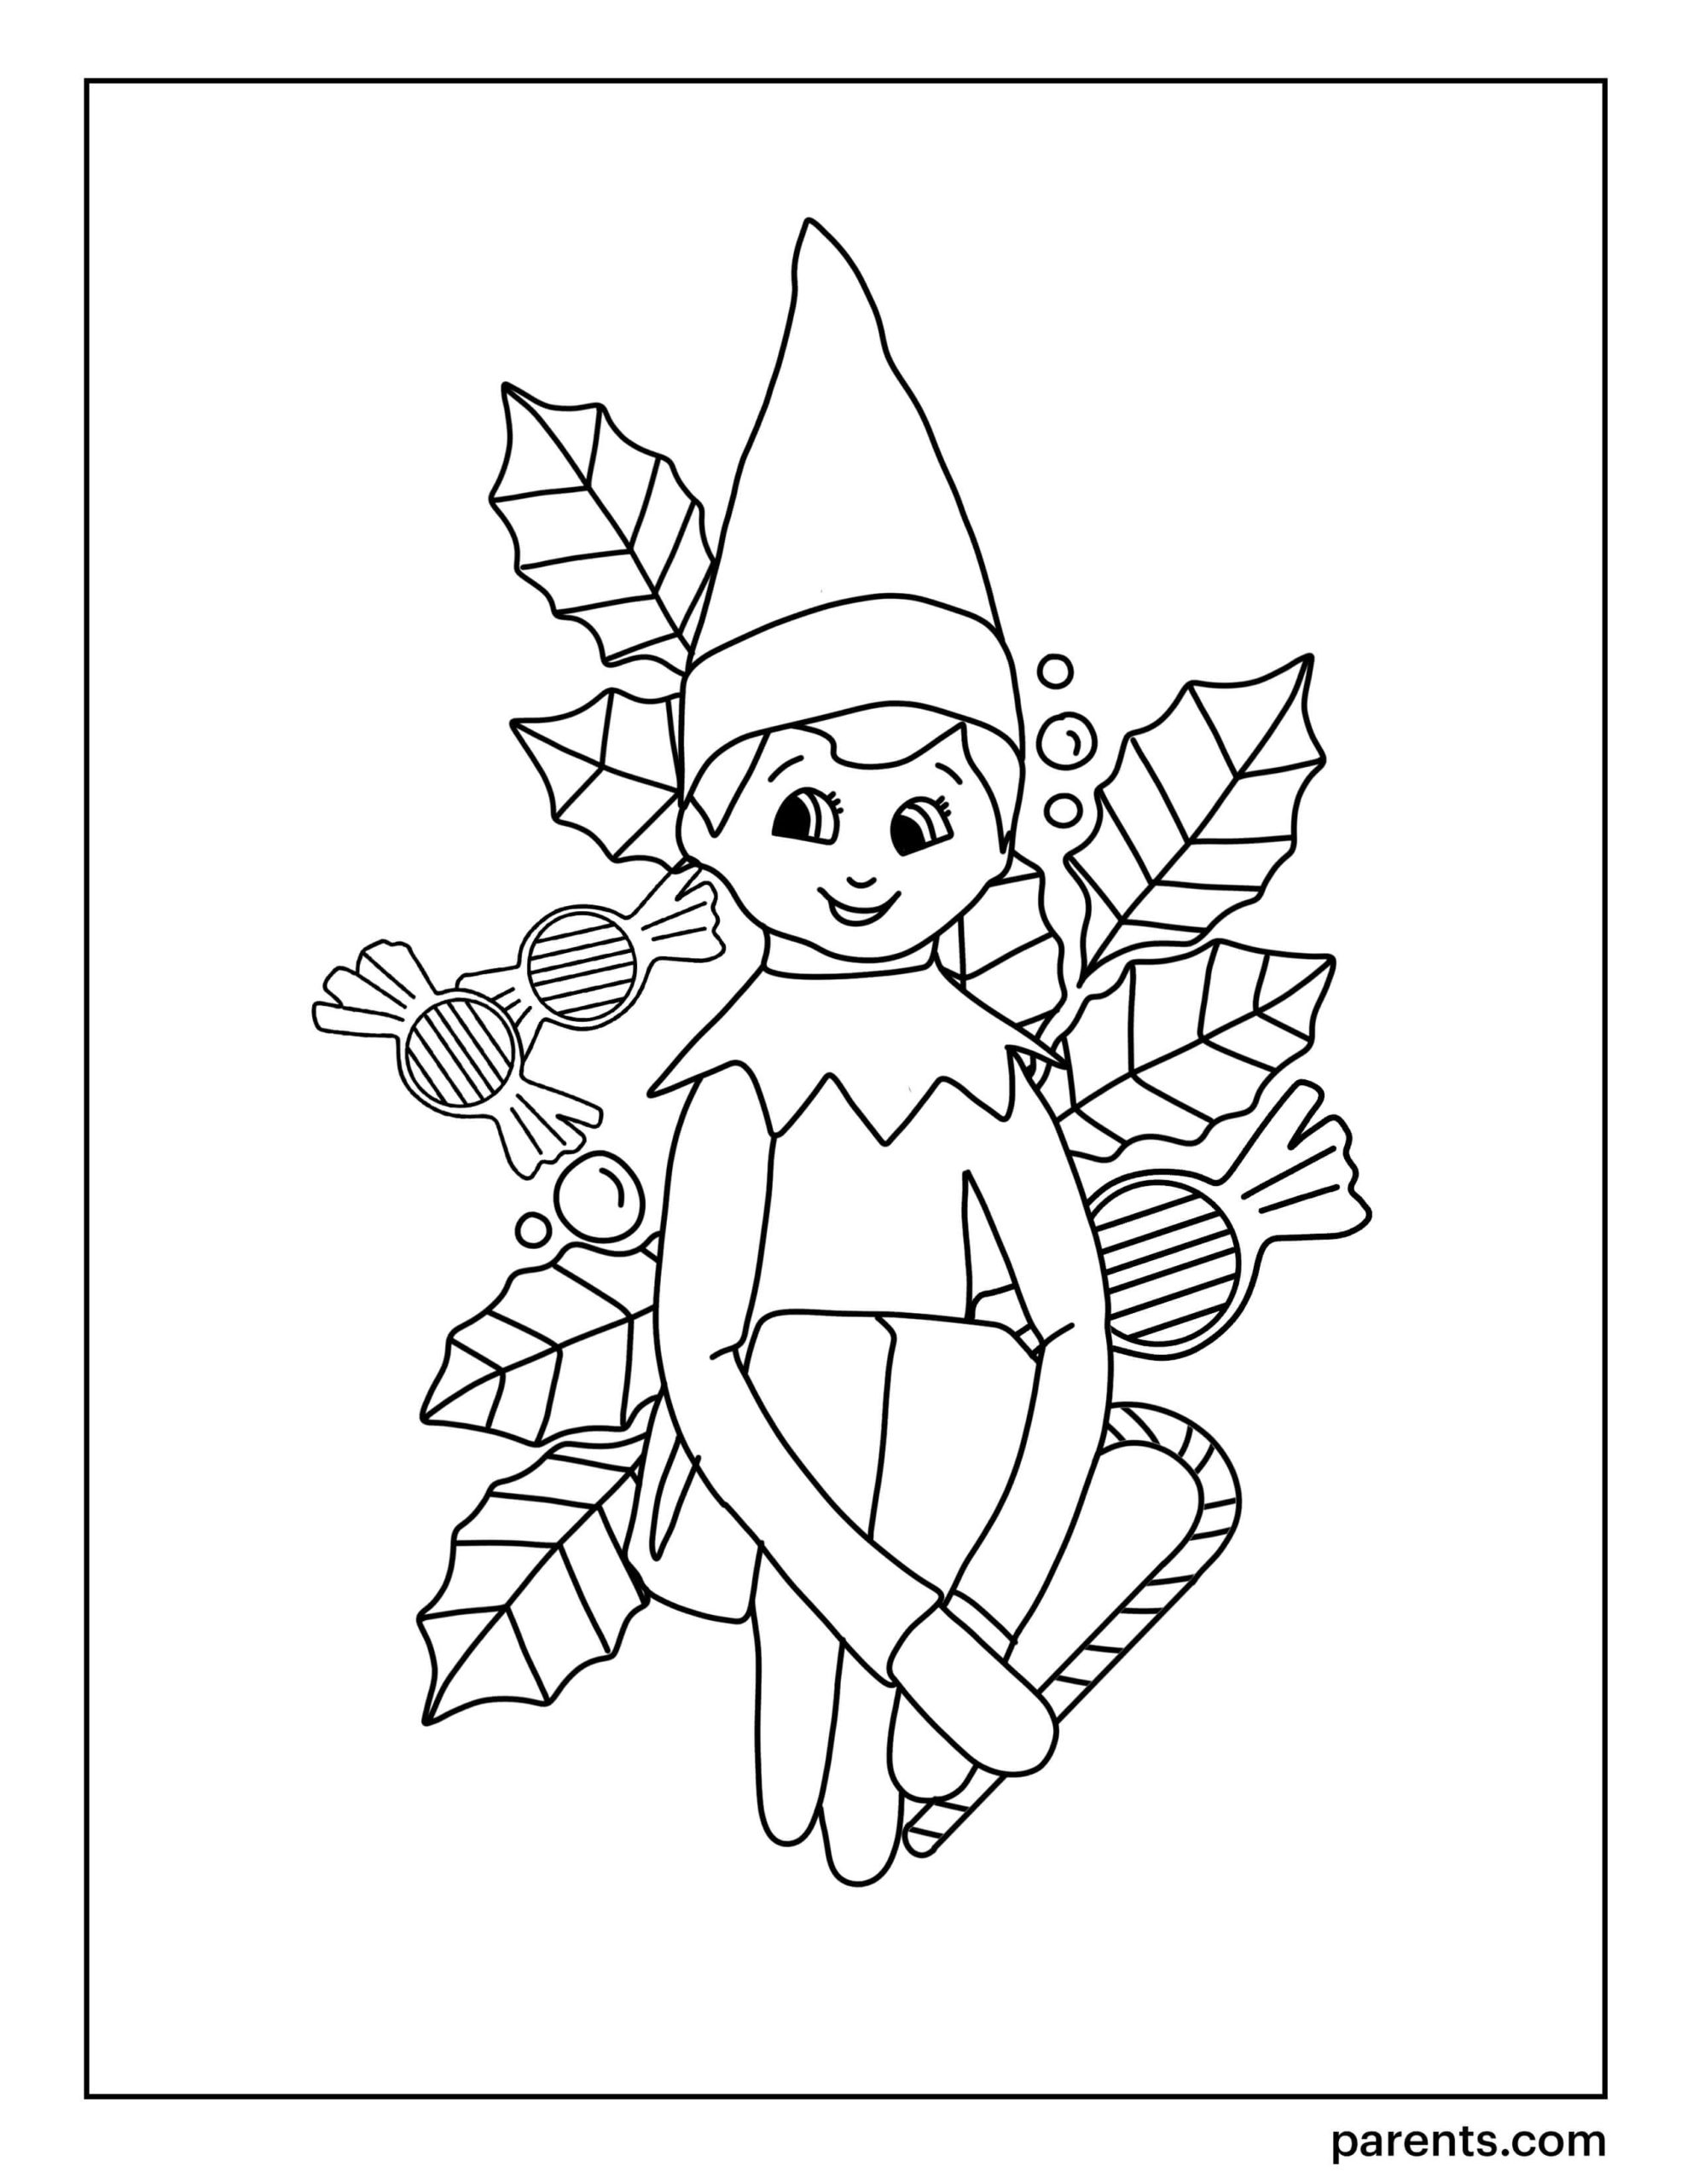 Elf Coloring Sheet Printable Printable World Holiday The Best